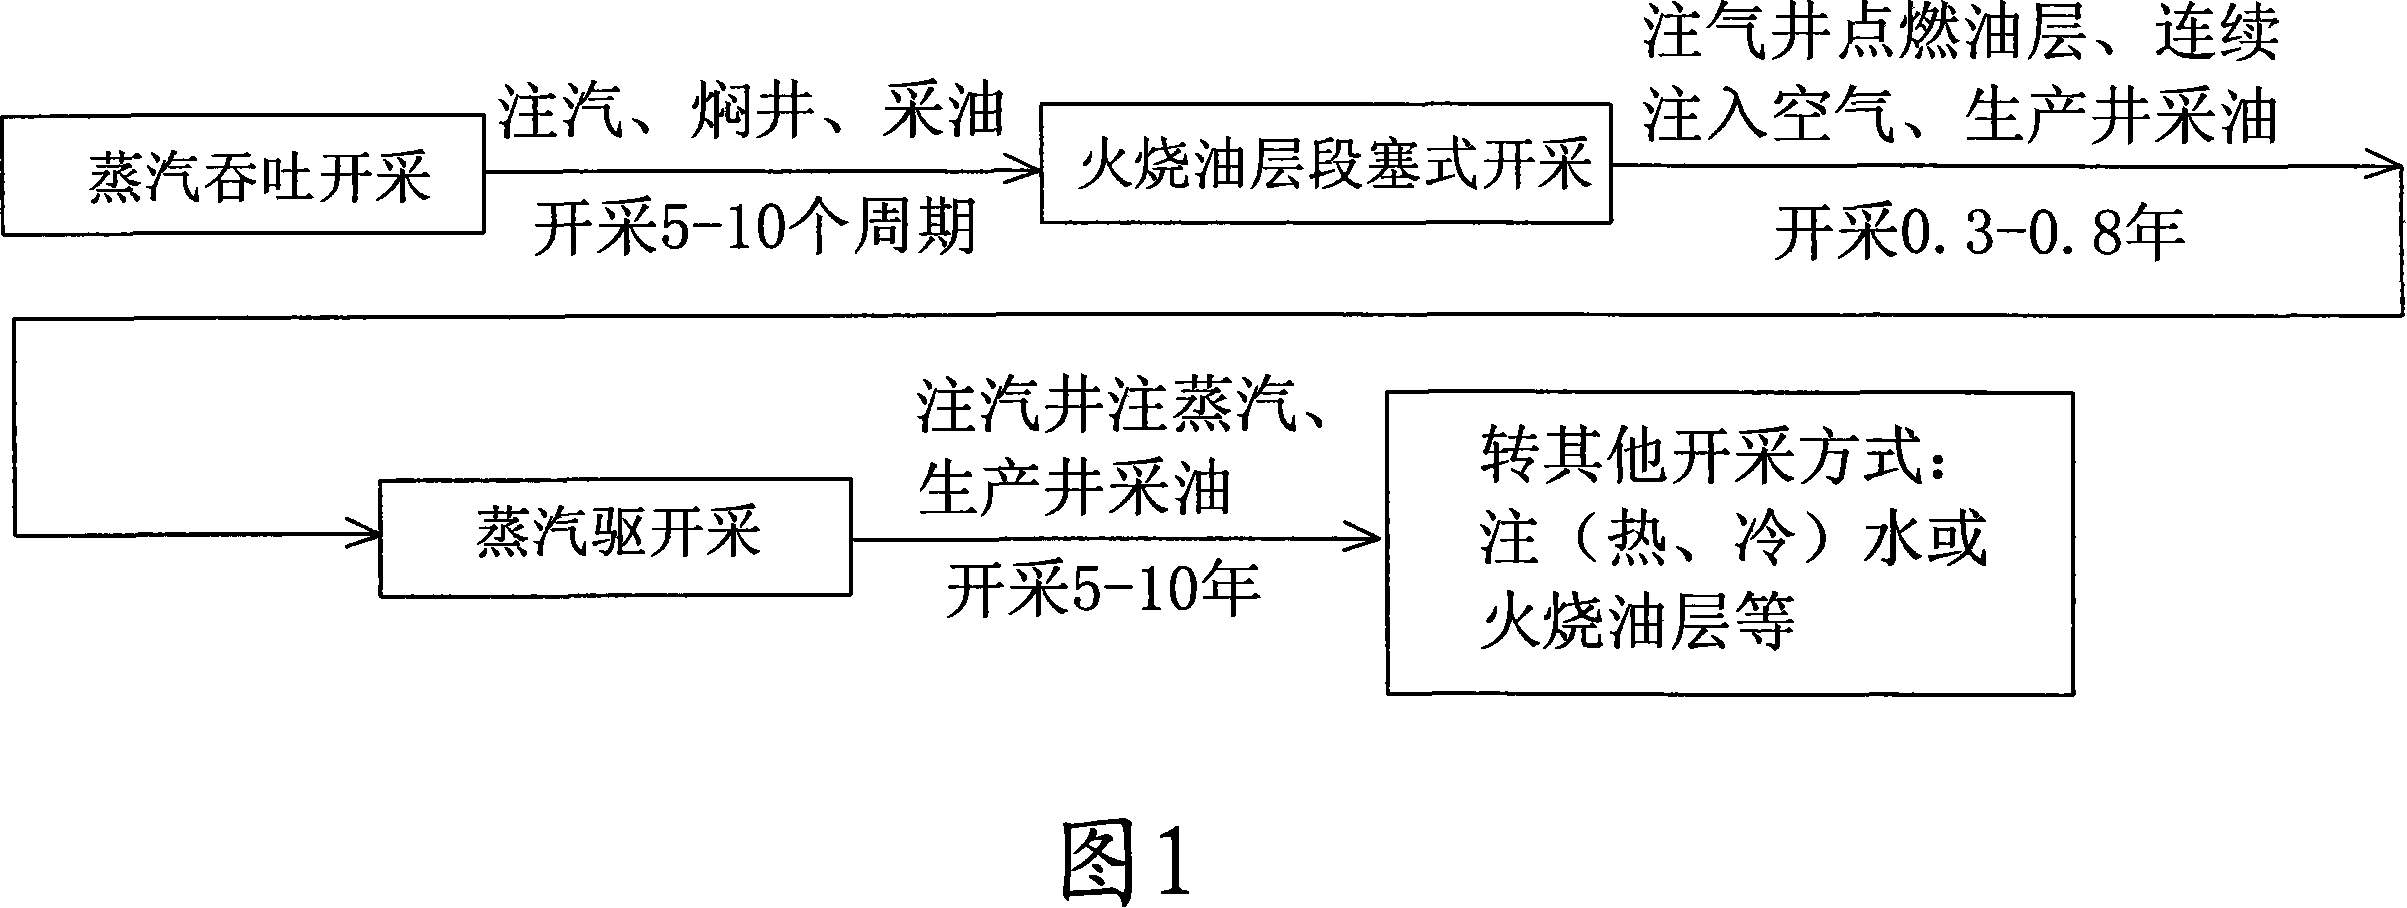 In situ combustion slug and steam driving combined type crude oil producing method